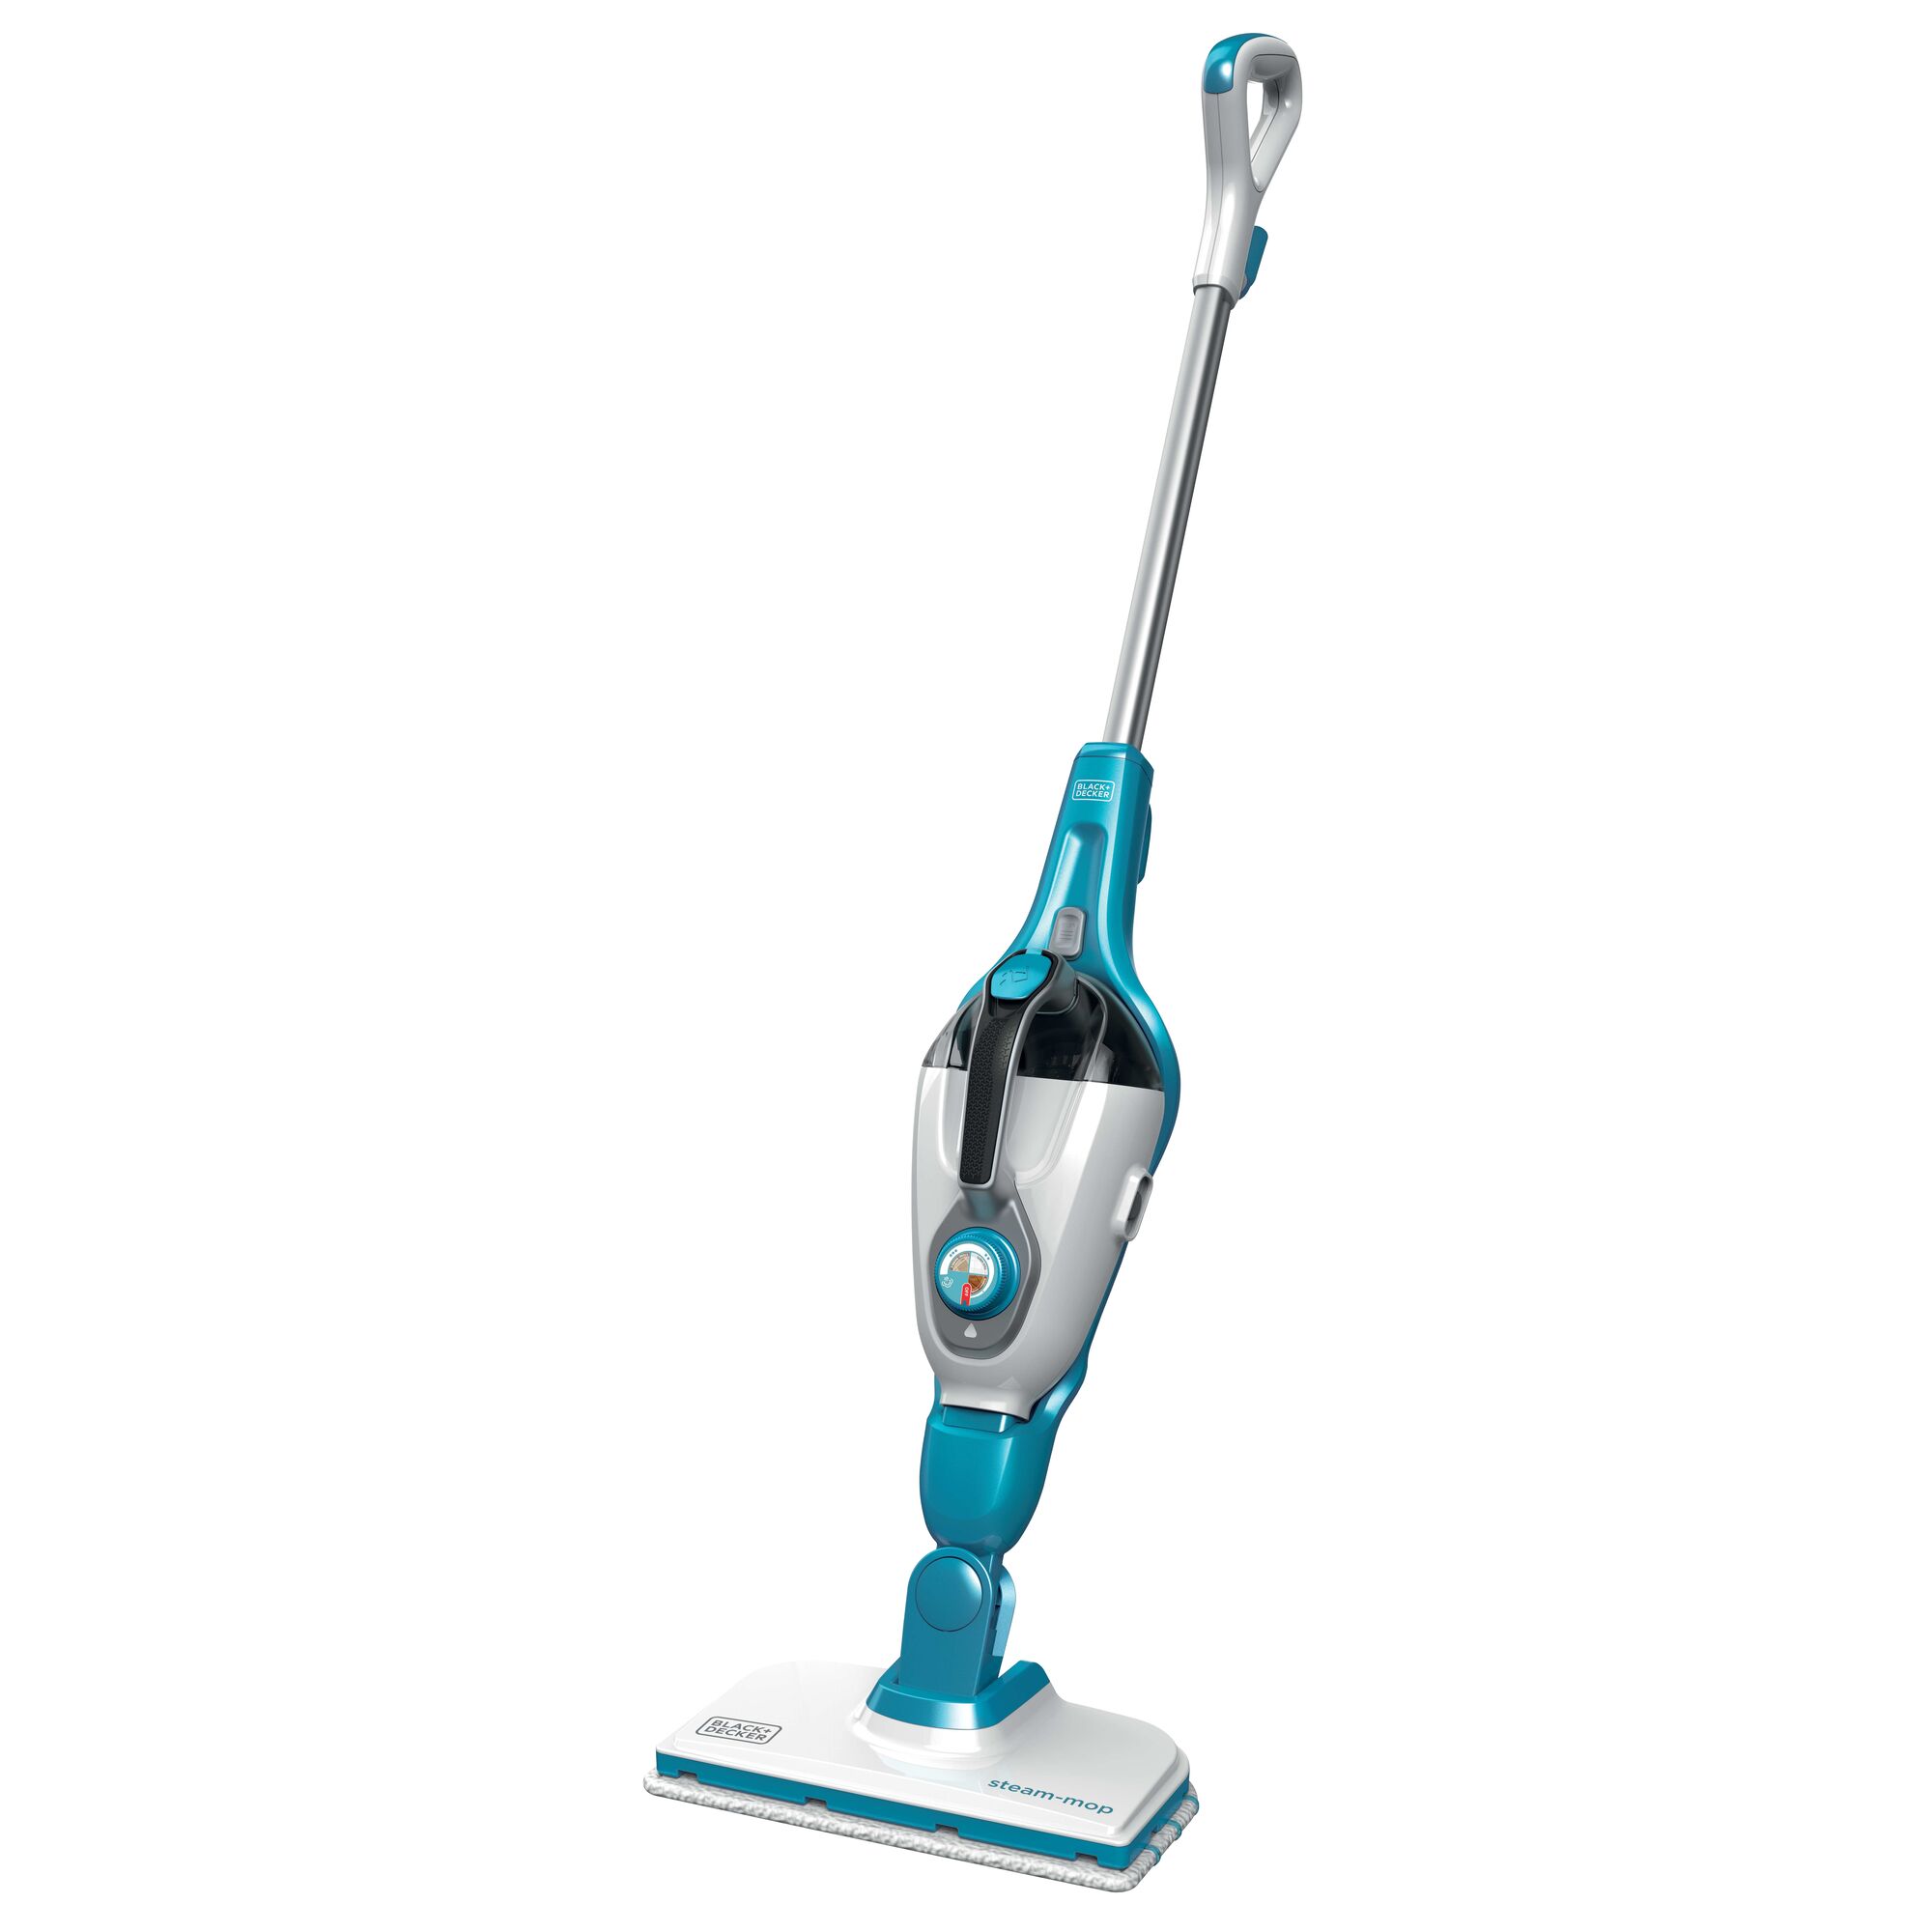 5 in 1 Steam Mop and Portable Steamer.